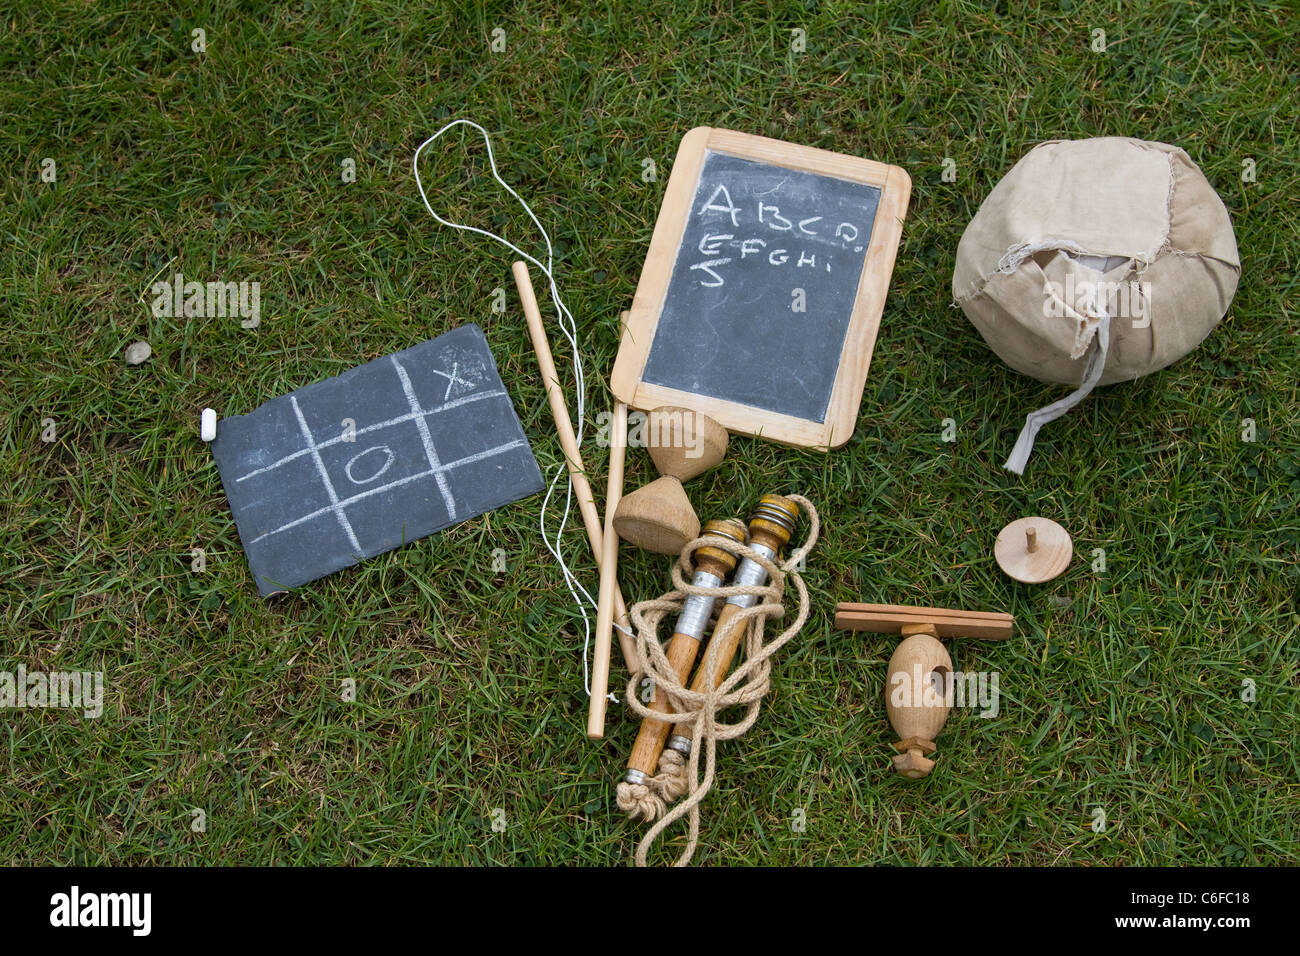 17th Century wooden children's old wood street toys, spinning top, jump-ropes and blackboards; Life & Times Civilian Historical Re-enactment, Tutbury Castle, Derbyshire, UK Stock Photo